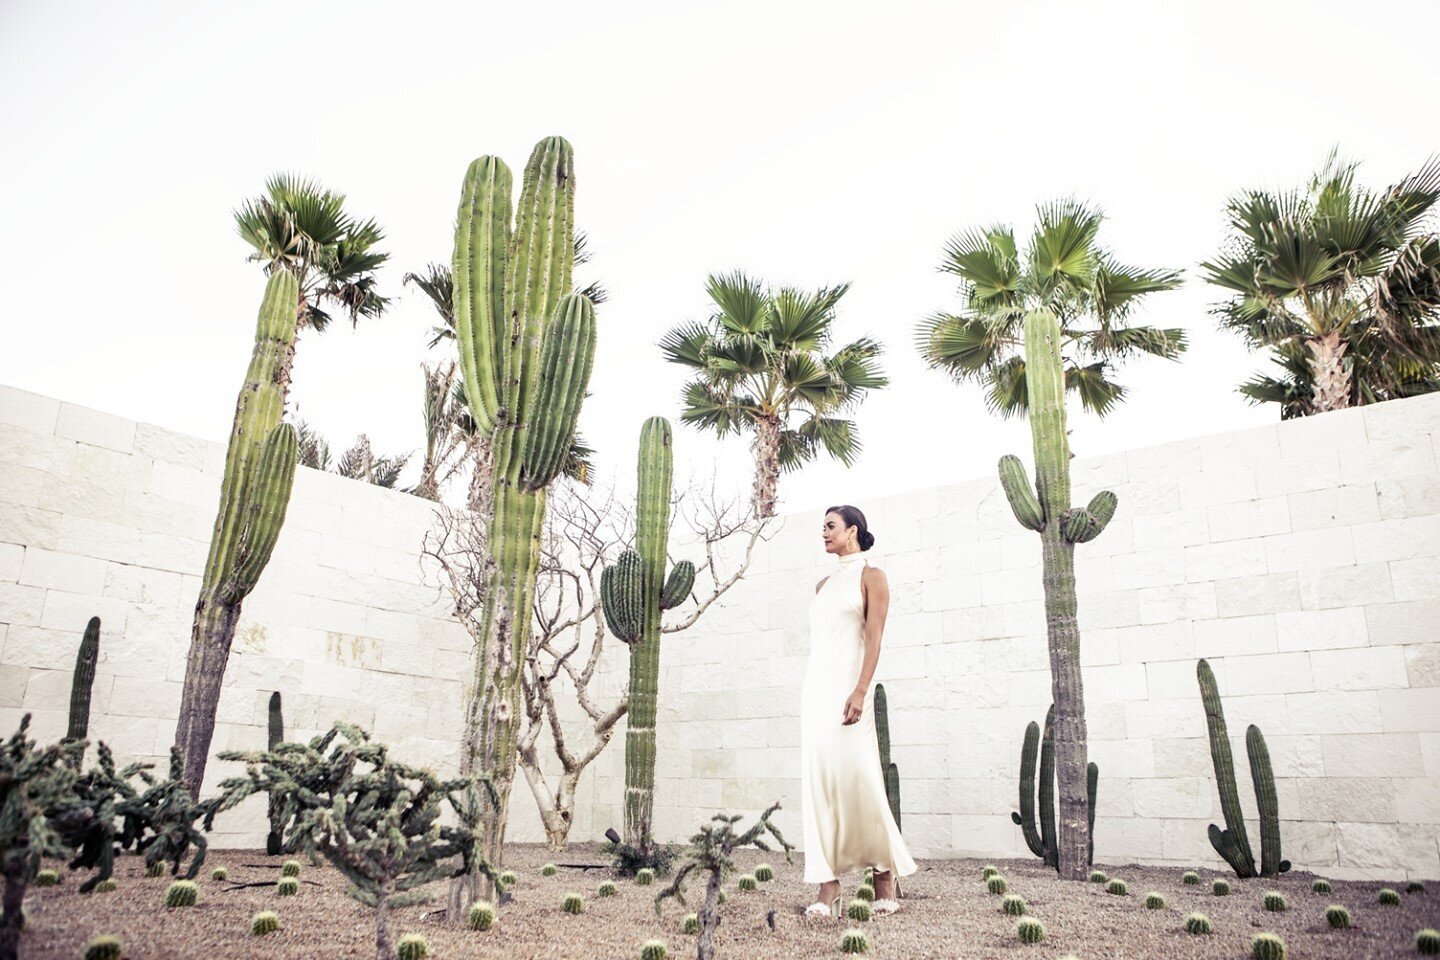 Amidst the cacti, this Arizona bride feels right at home! What a beautiful setting for those who want both the beach and something a bit different, too! #beachyvows⁠
⁠
Visit BeachyVows.com for the best destination wedding ideas and venues! Beachy Vow